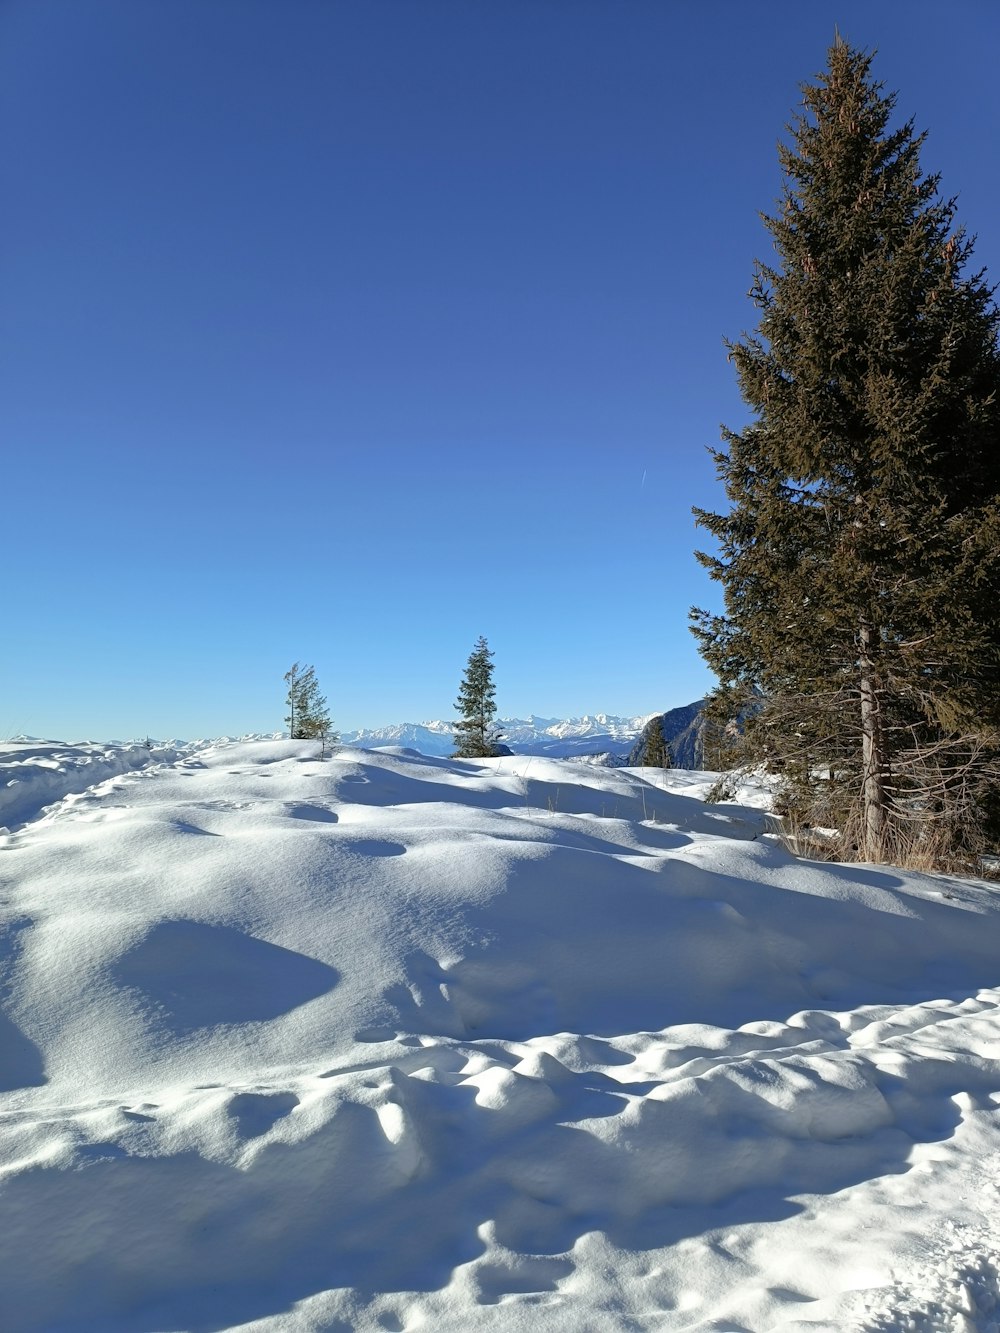 a snow covered hill with pine trees in the background